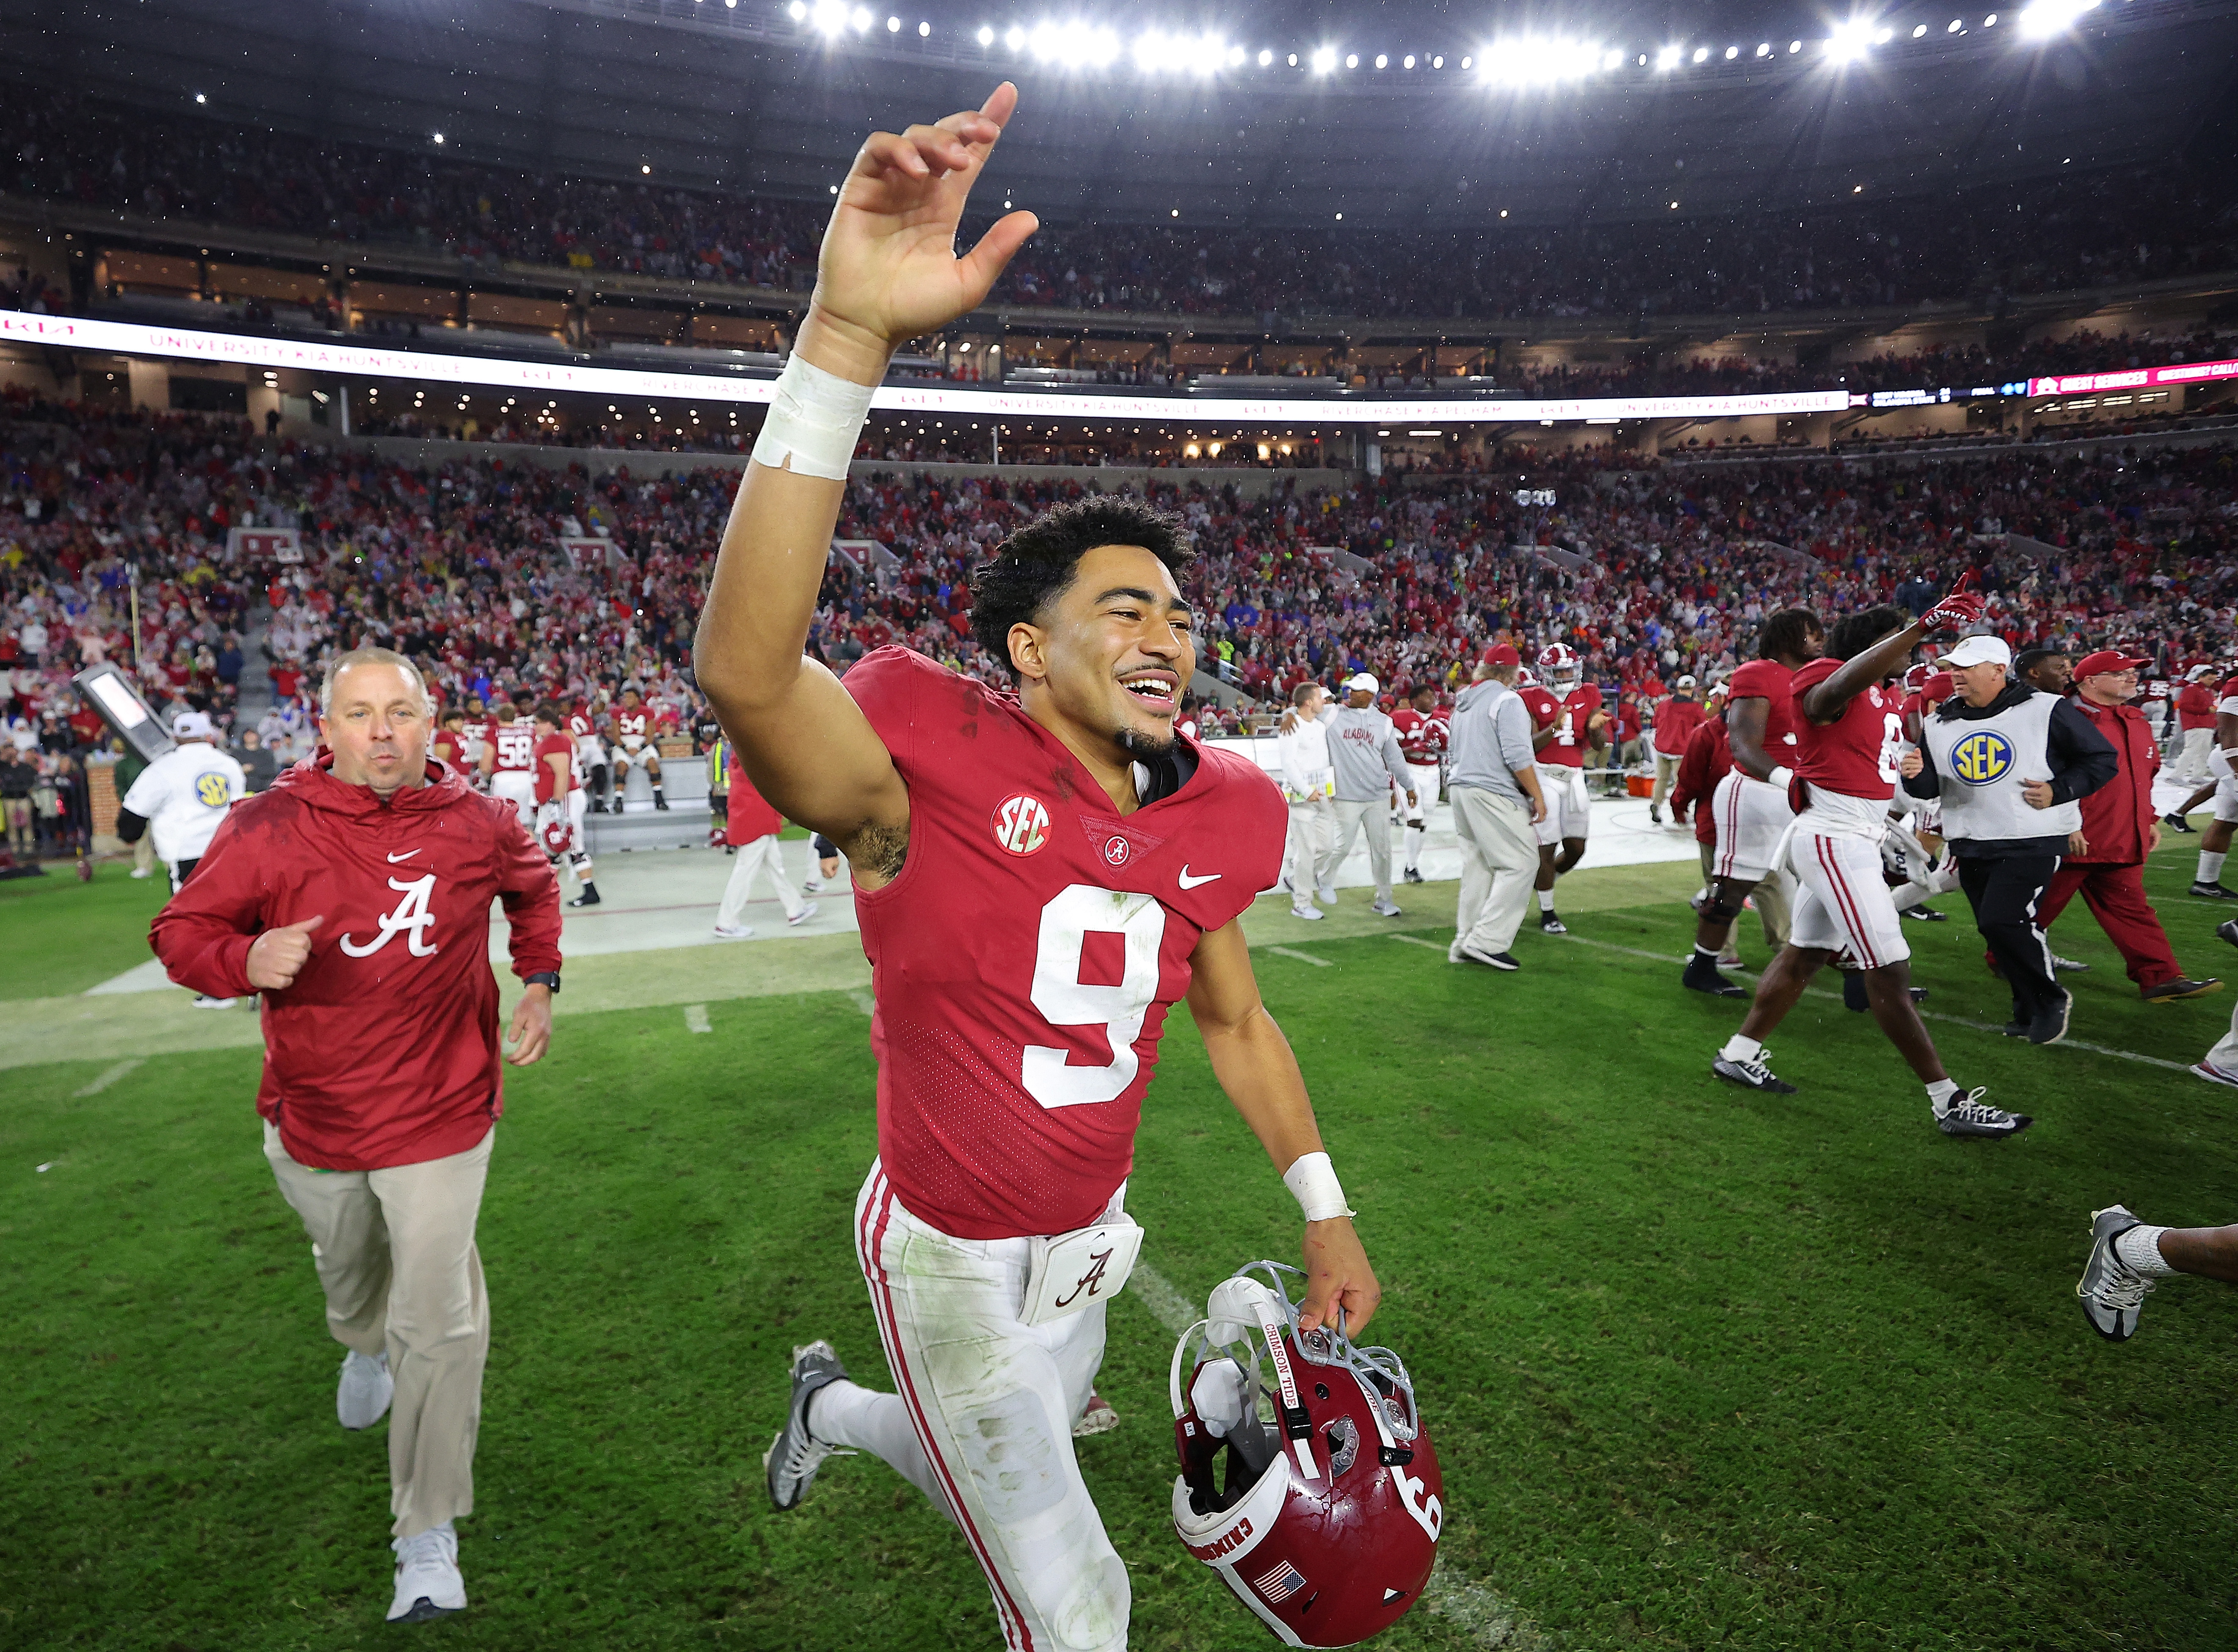 Bryce Young of the Alabama Crimson Tide reacts after their 49-27 win over the Auburn Tigers at Bryant-Denny Stadium on November 26, 2022 in Tuscaloosa, Alabama.